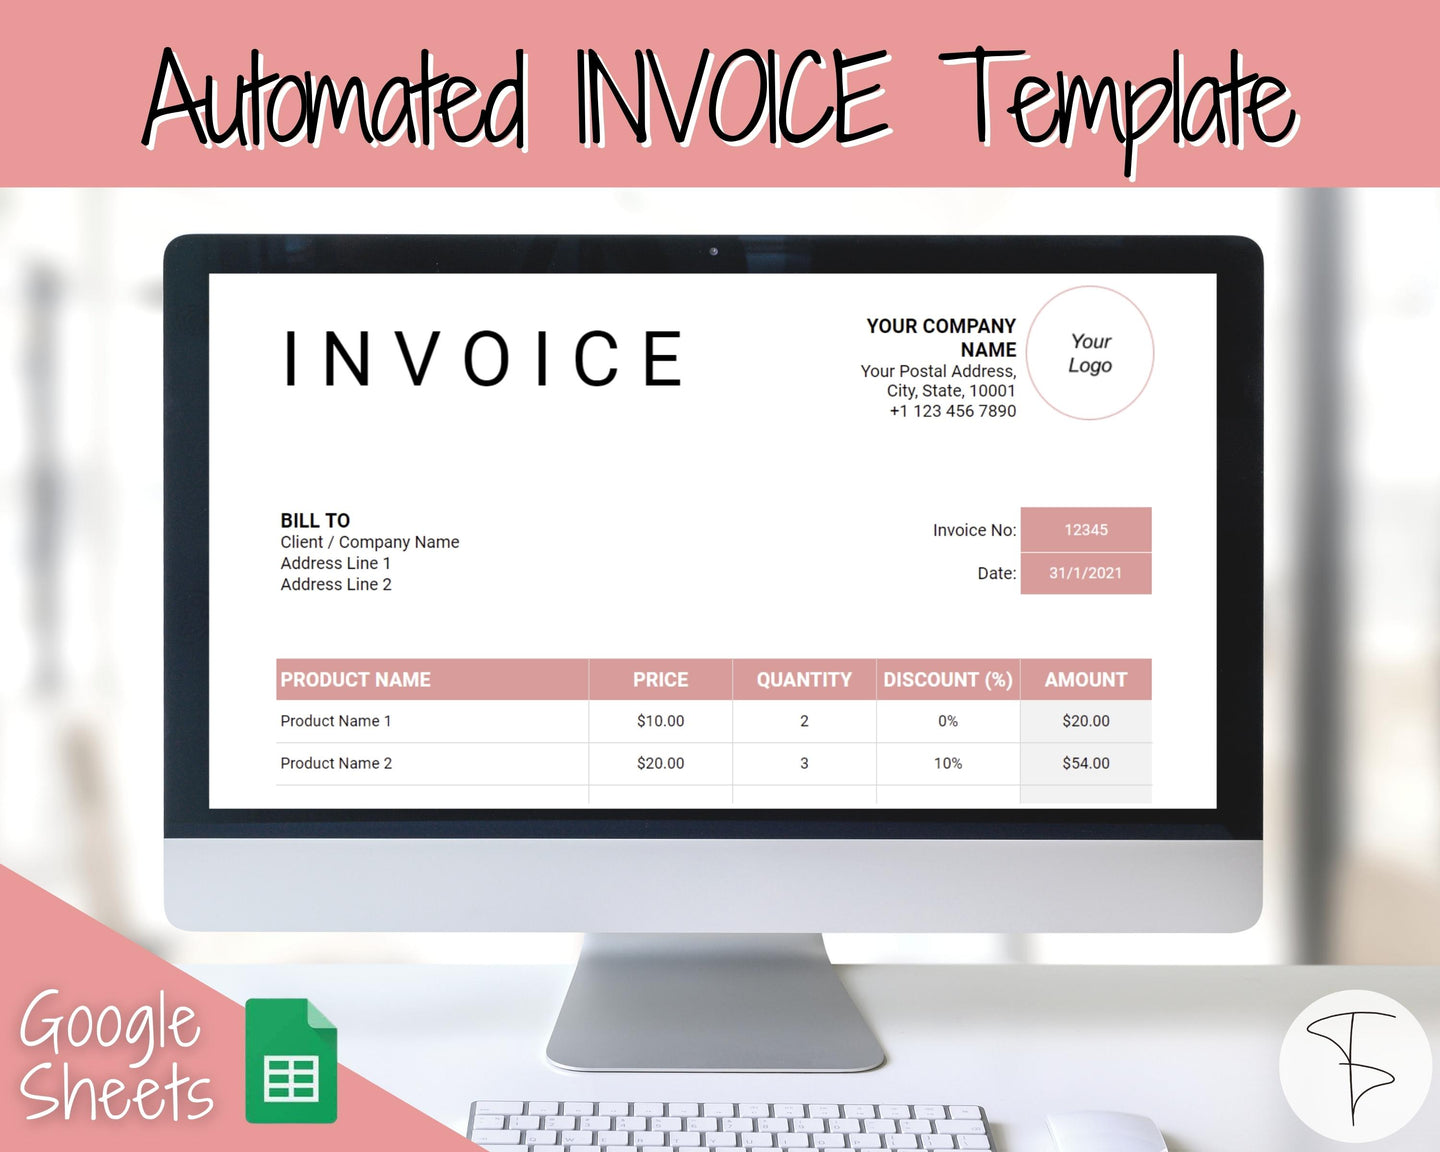 Small Business Invoice Spreadsheet Template | Automated Google Sheets Template, Customer Sales, Order Invoice